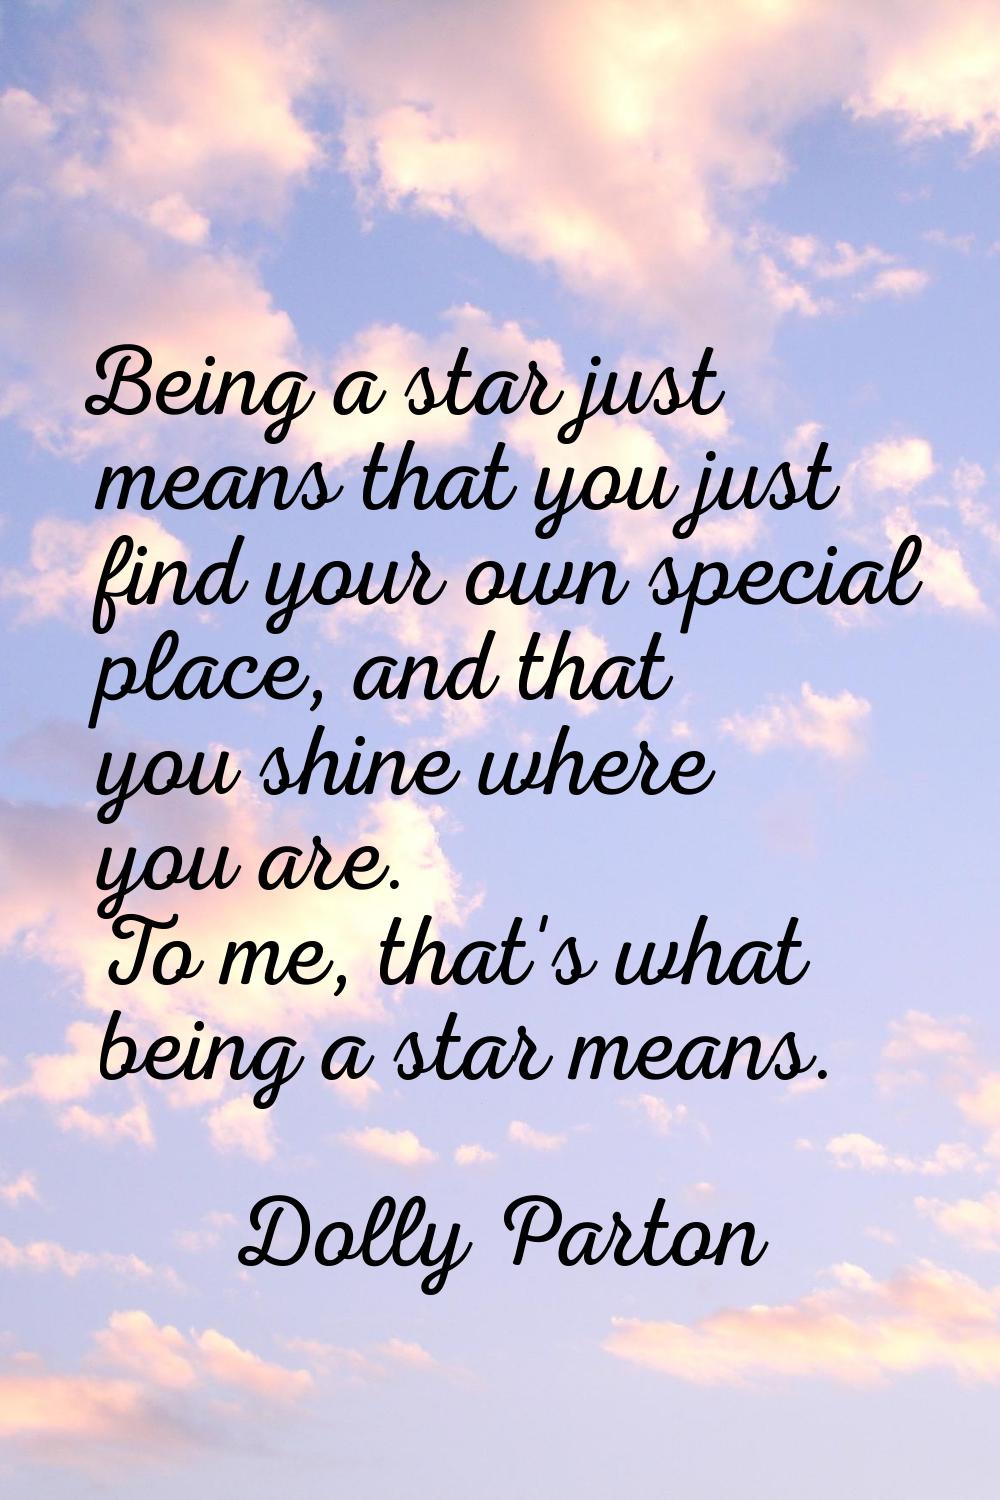 Being a star just means that you just find your own special place, and that you shine where you are